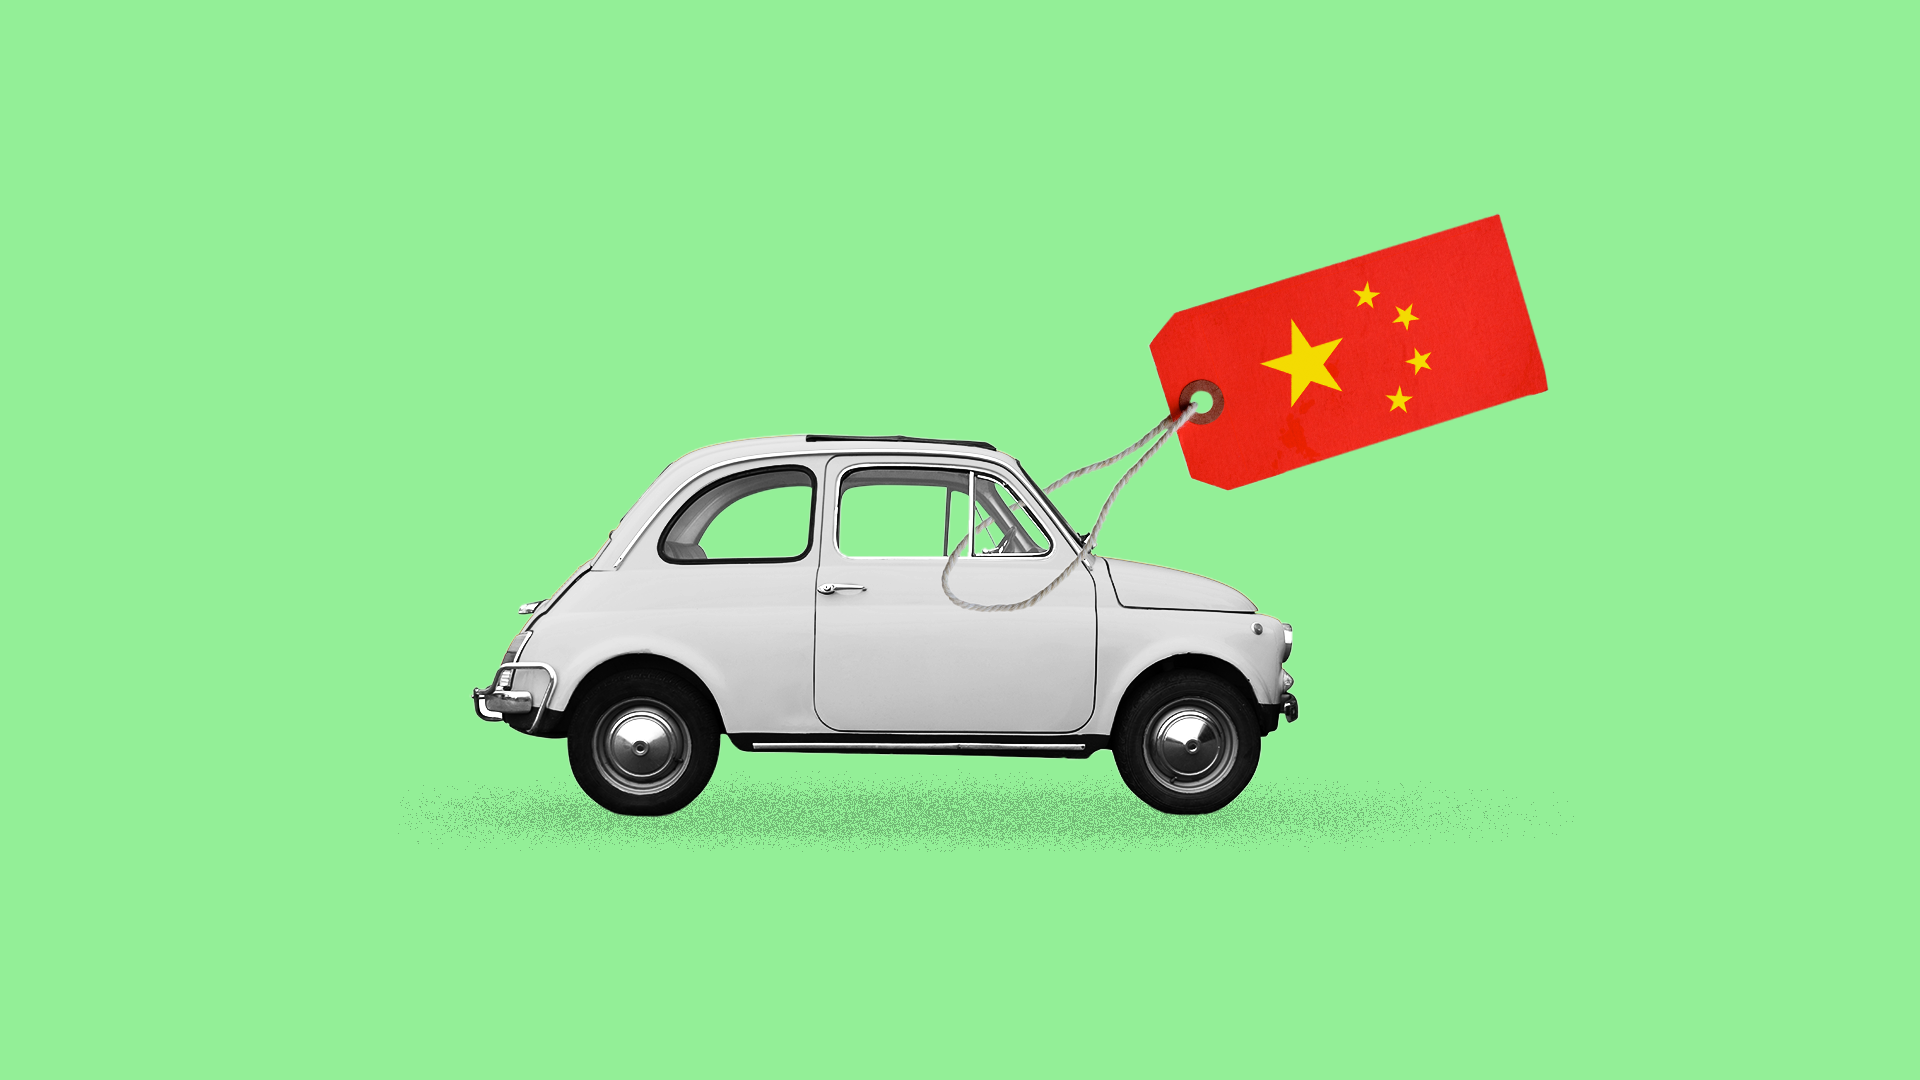 Illustration of a car with a price tag made of the Chinese flag. 